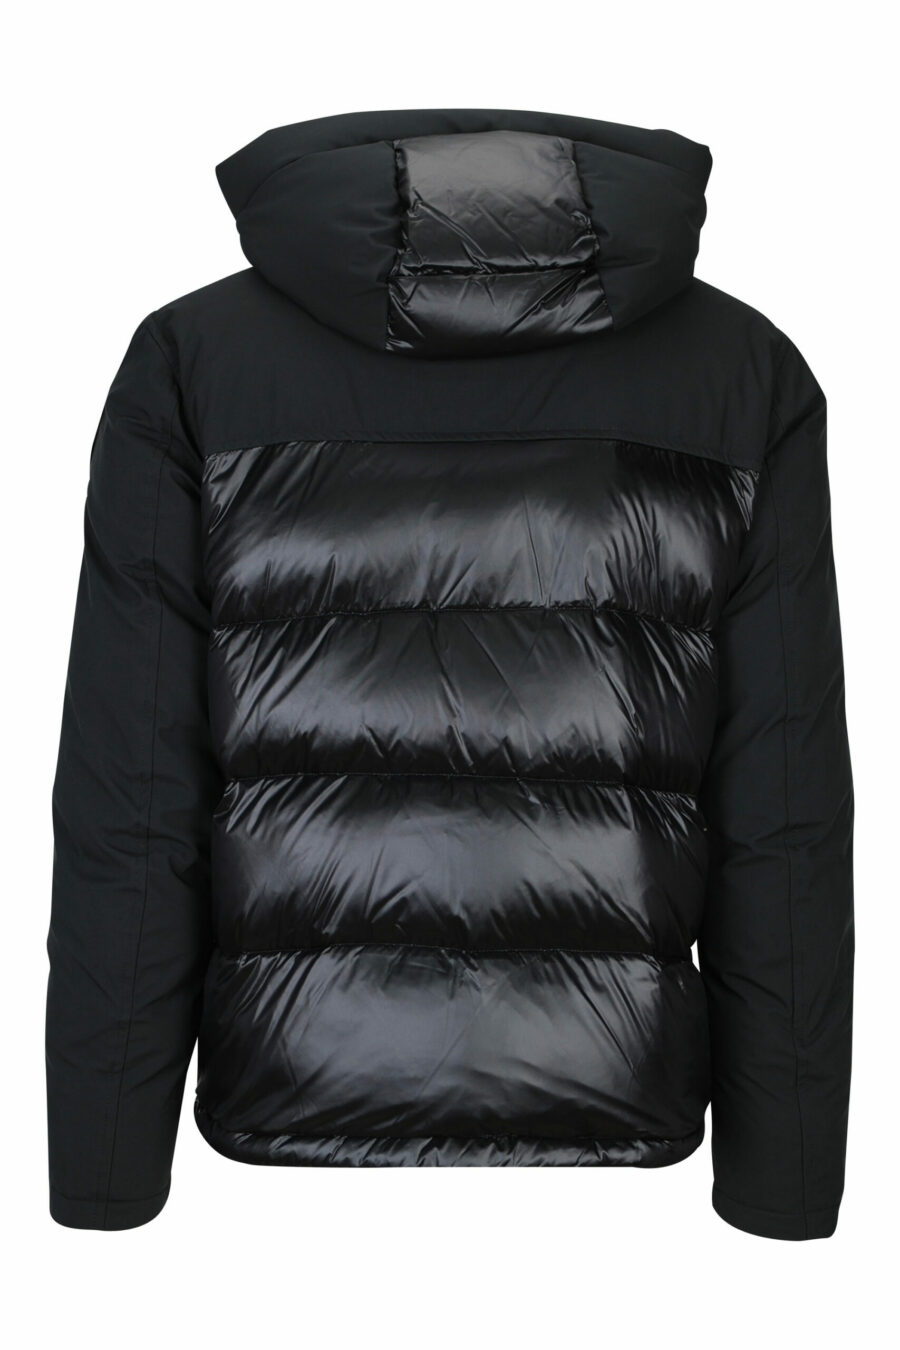 Black mix hooded jacket with logo patch - 8058610657222 2 scaled